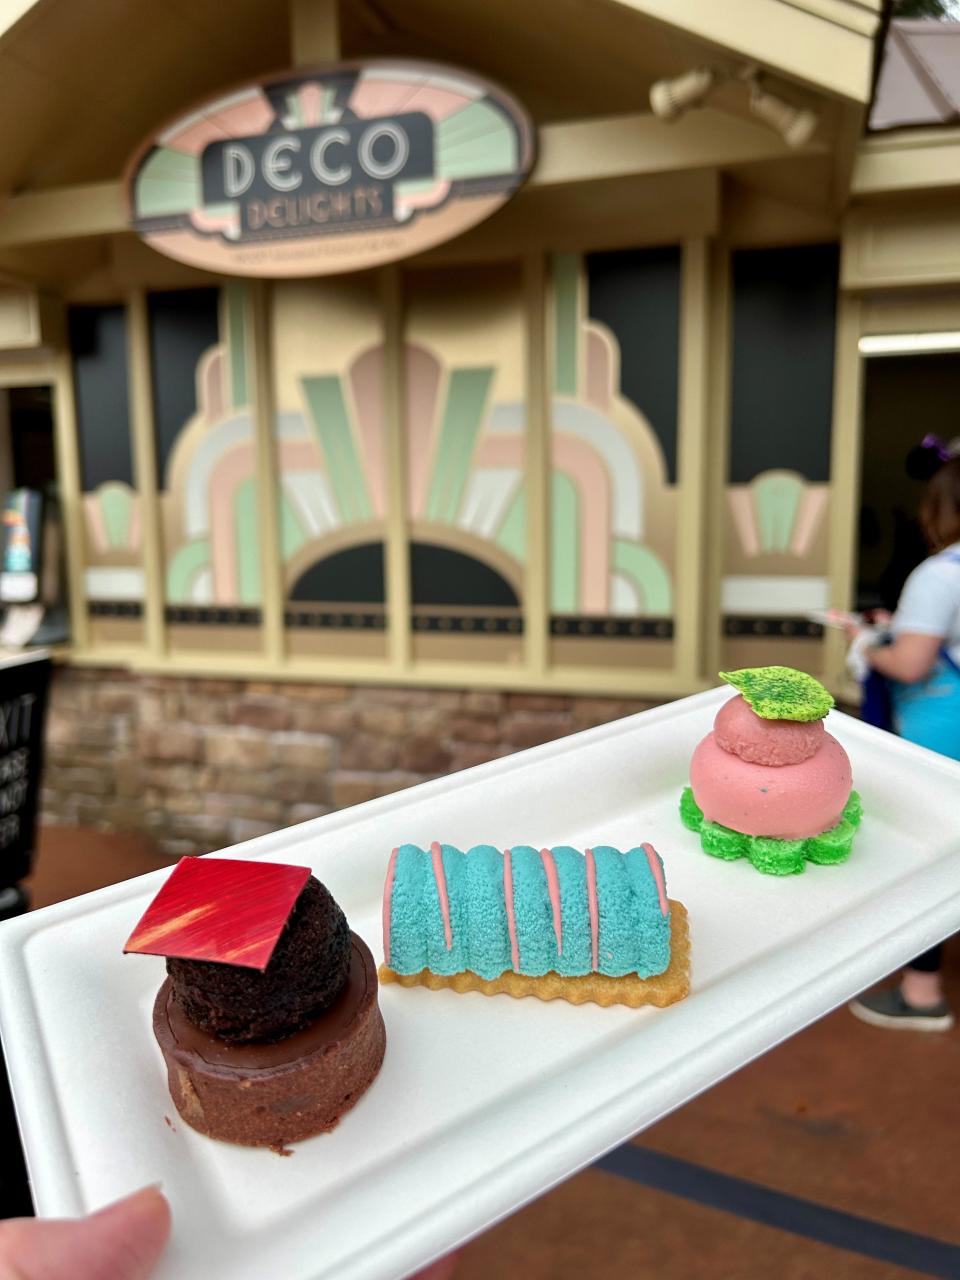 The Neapolitan Dessert Trio, which includes chocolate tart, vanilla bean cheesecake and strawberry mousse, is a new dish at the 2024 EPCOT International Festival of the Arts.